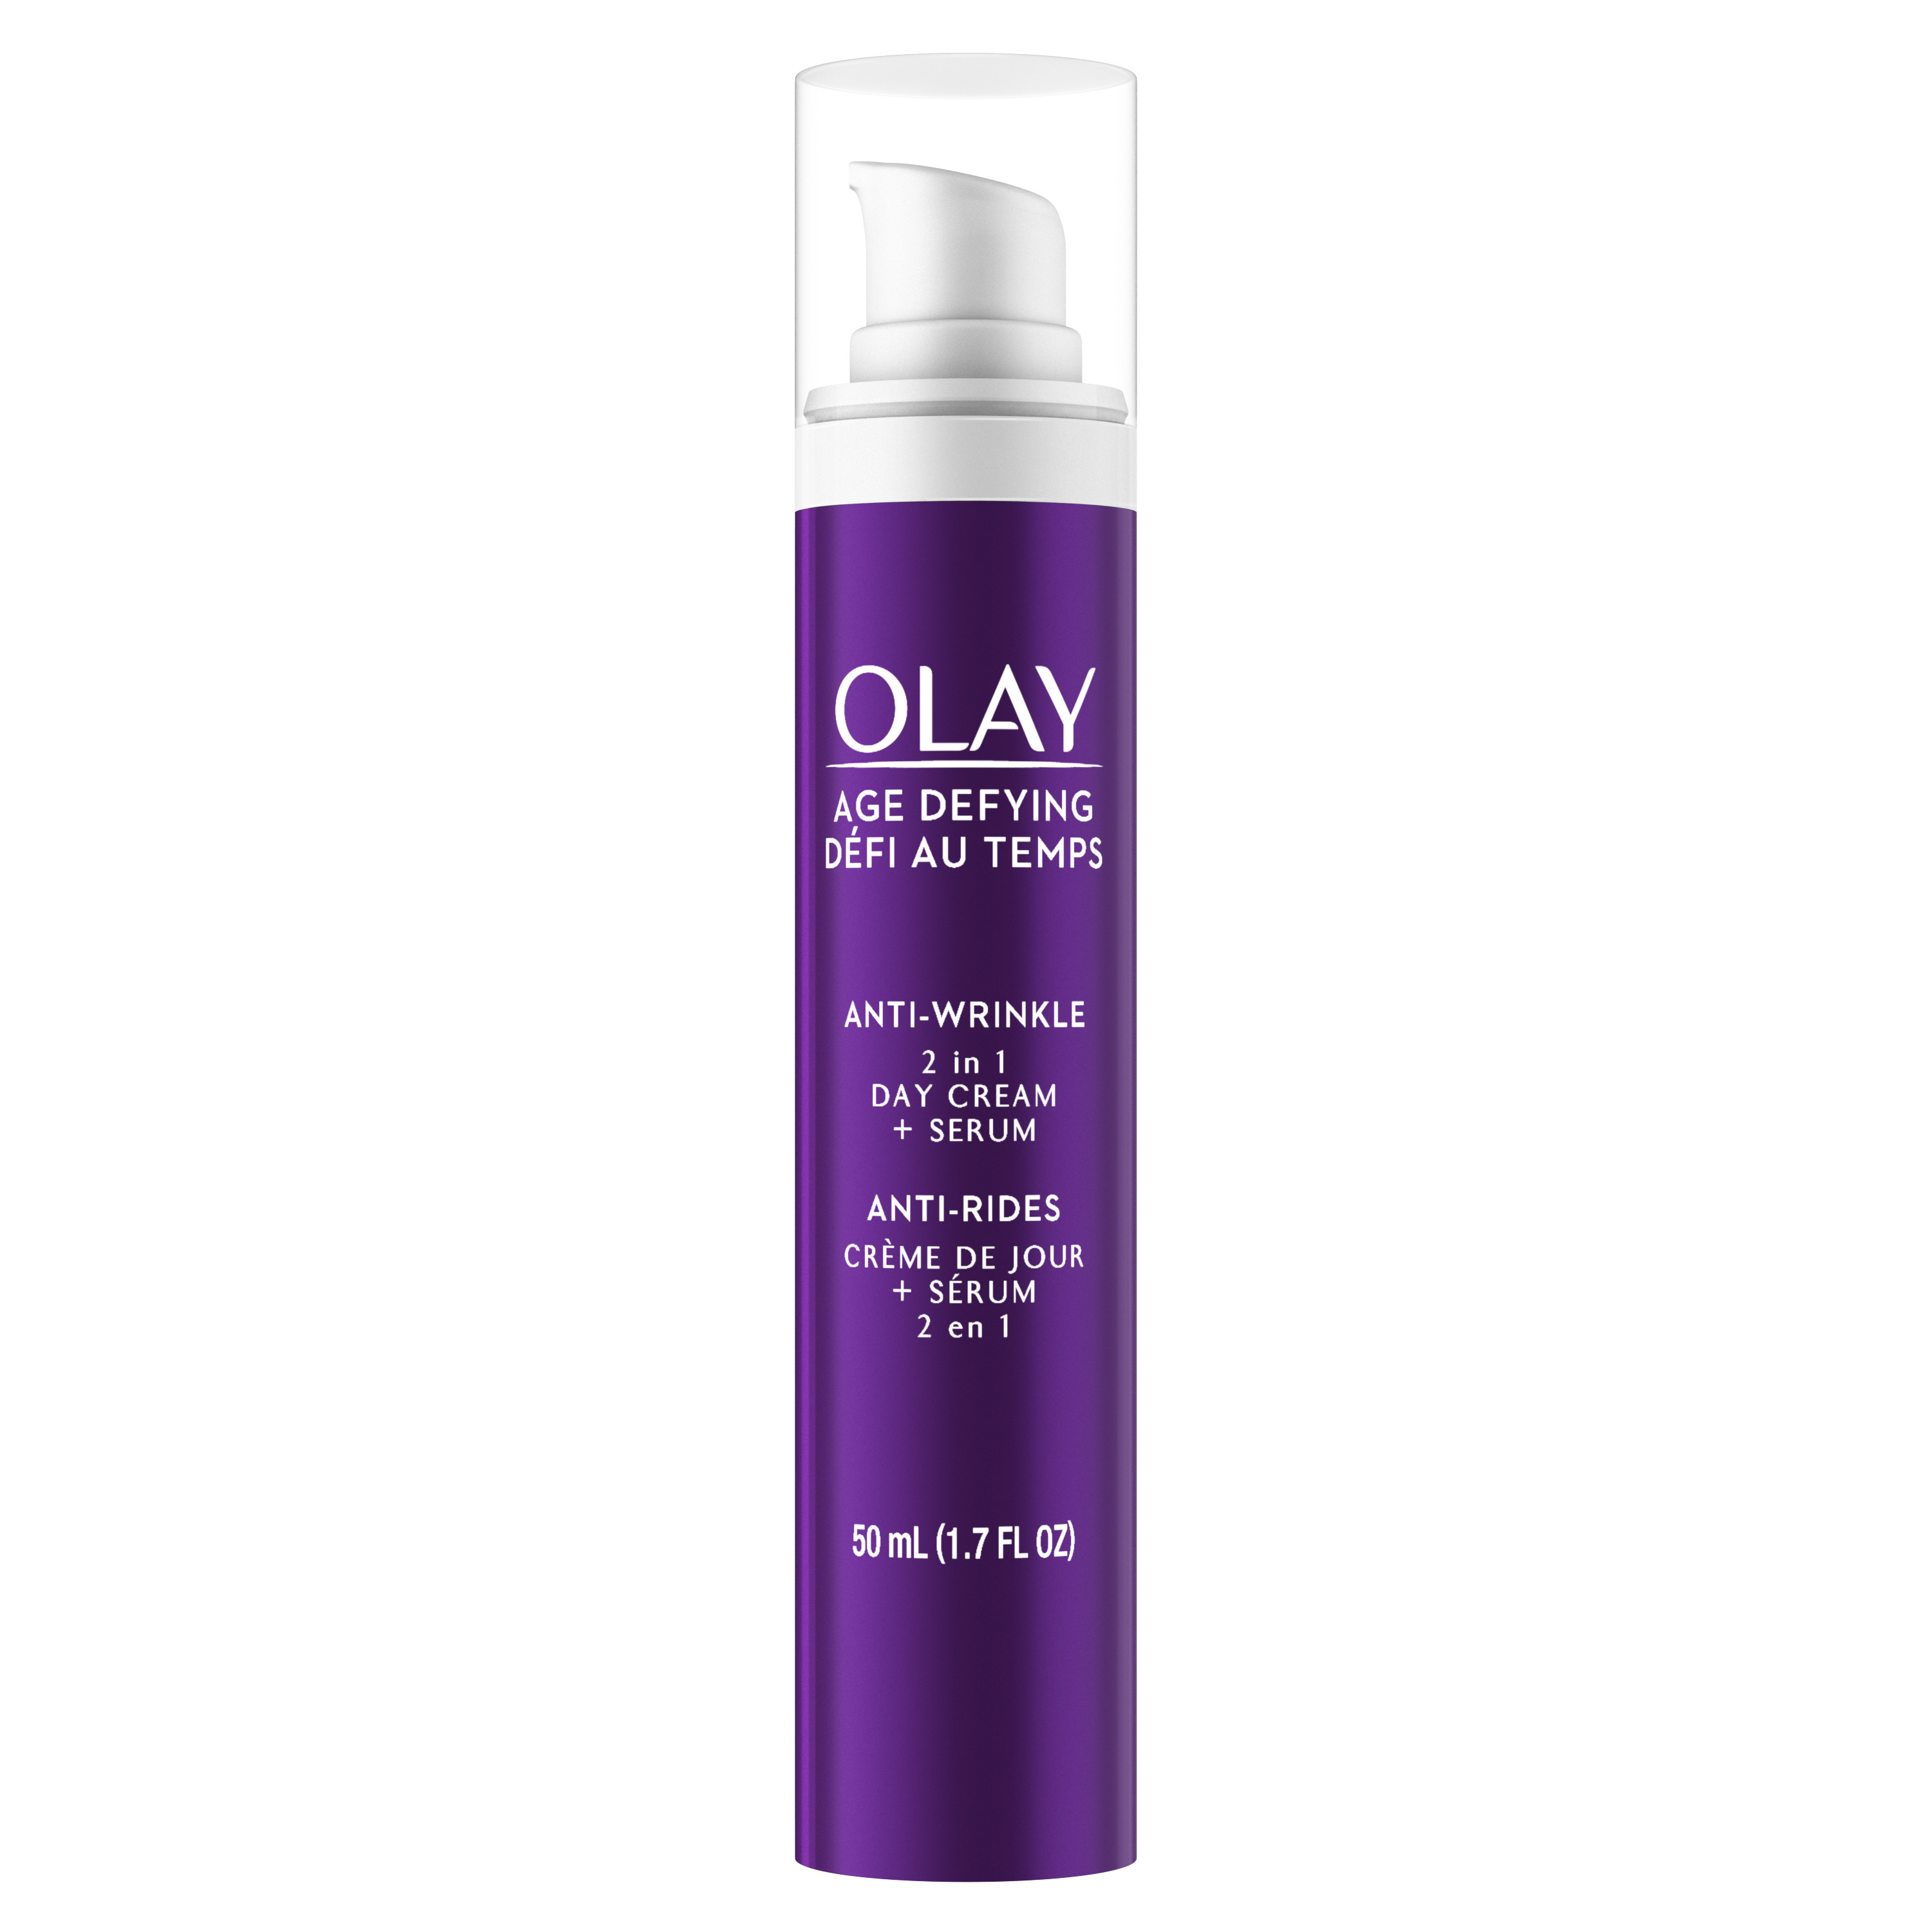 Olay Age Defying 2 in 1 Day Cream Plus Serum, Anti-Wrinkle, All Skin Types, 1.7 oz - image 4 of 9